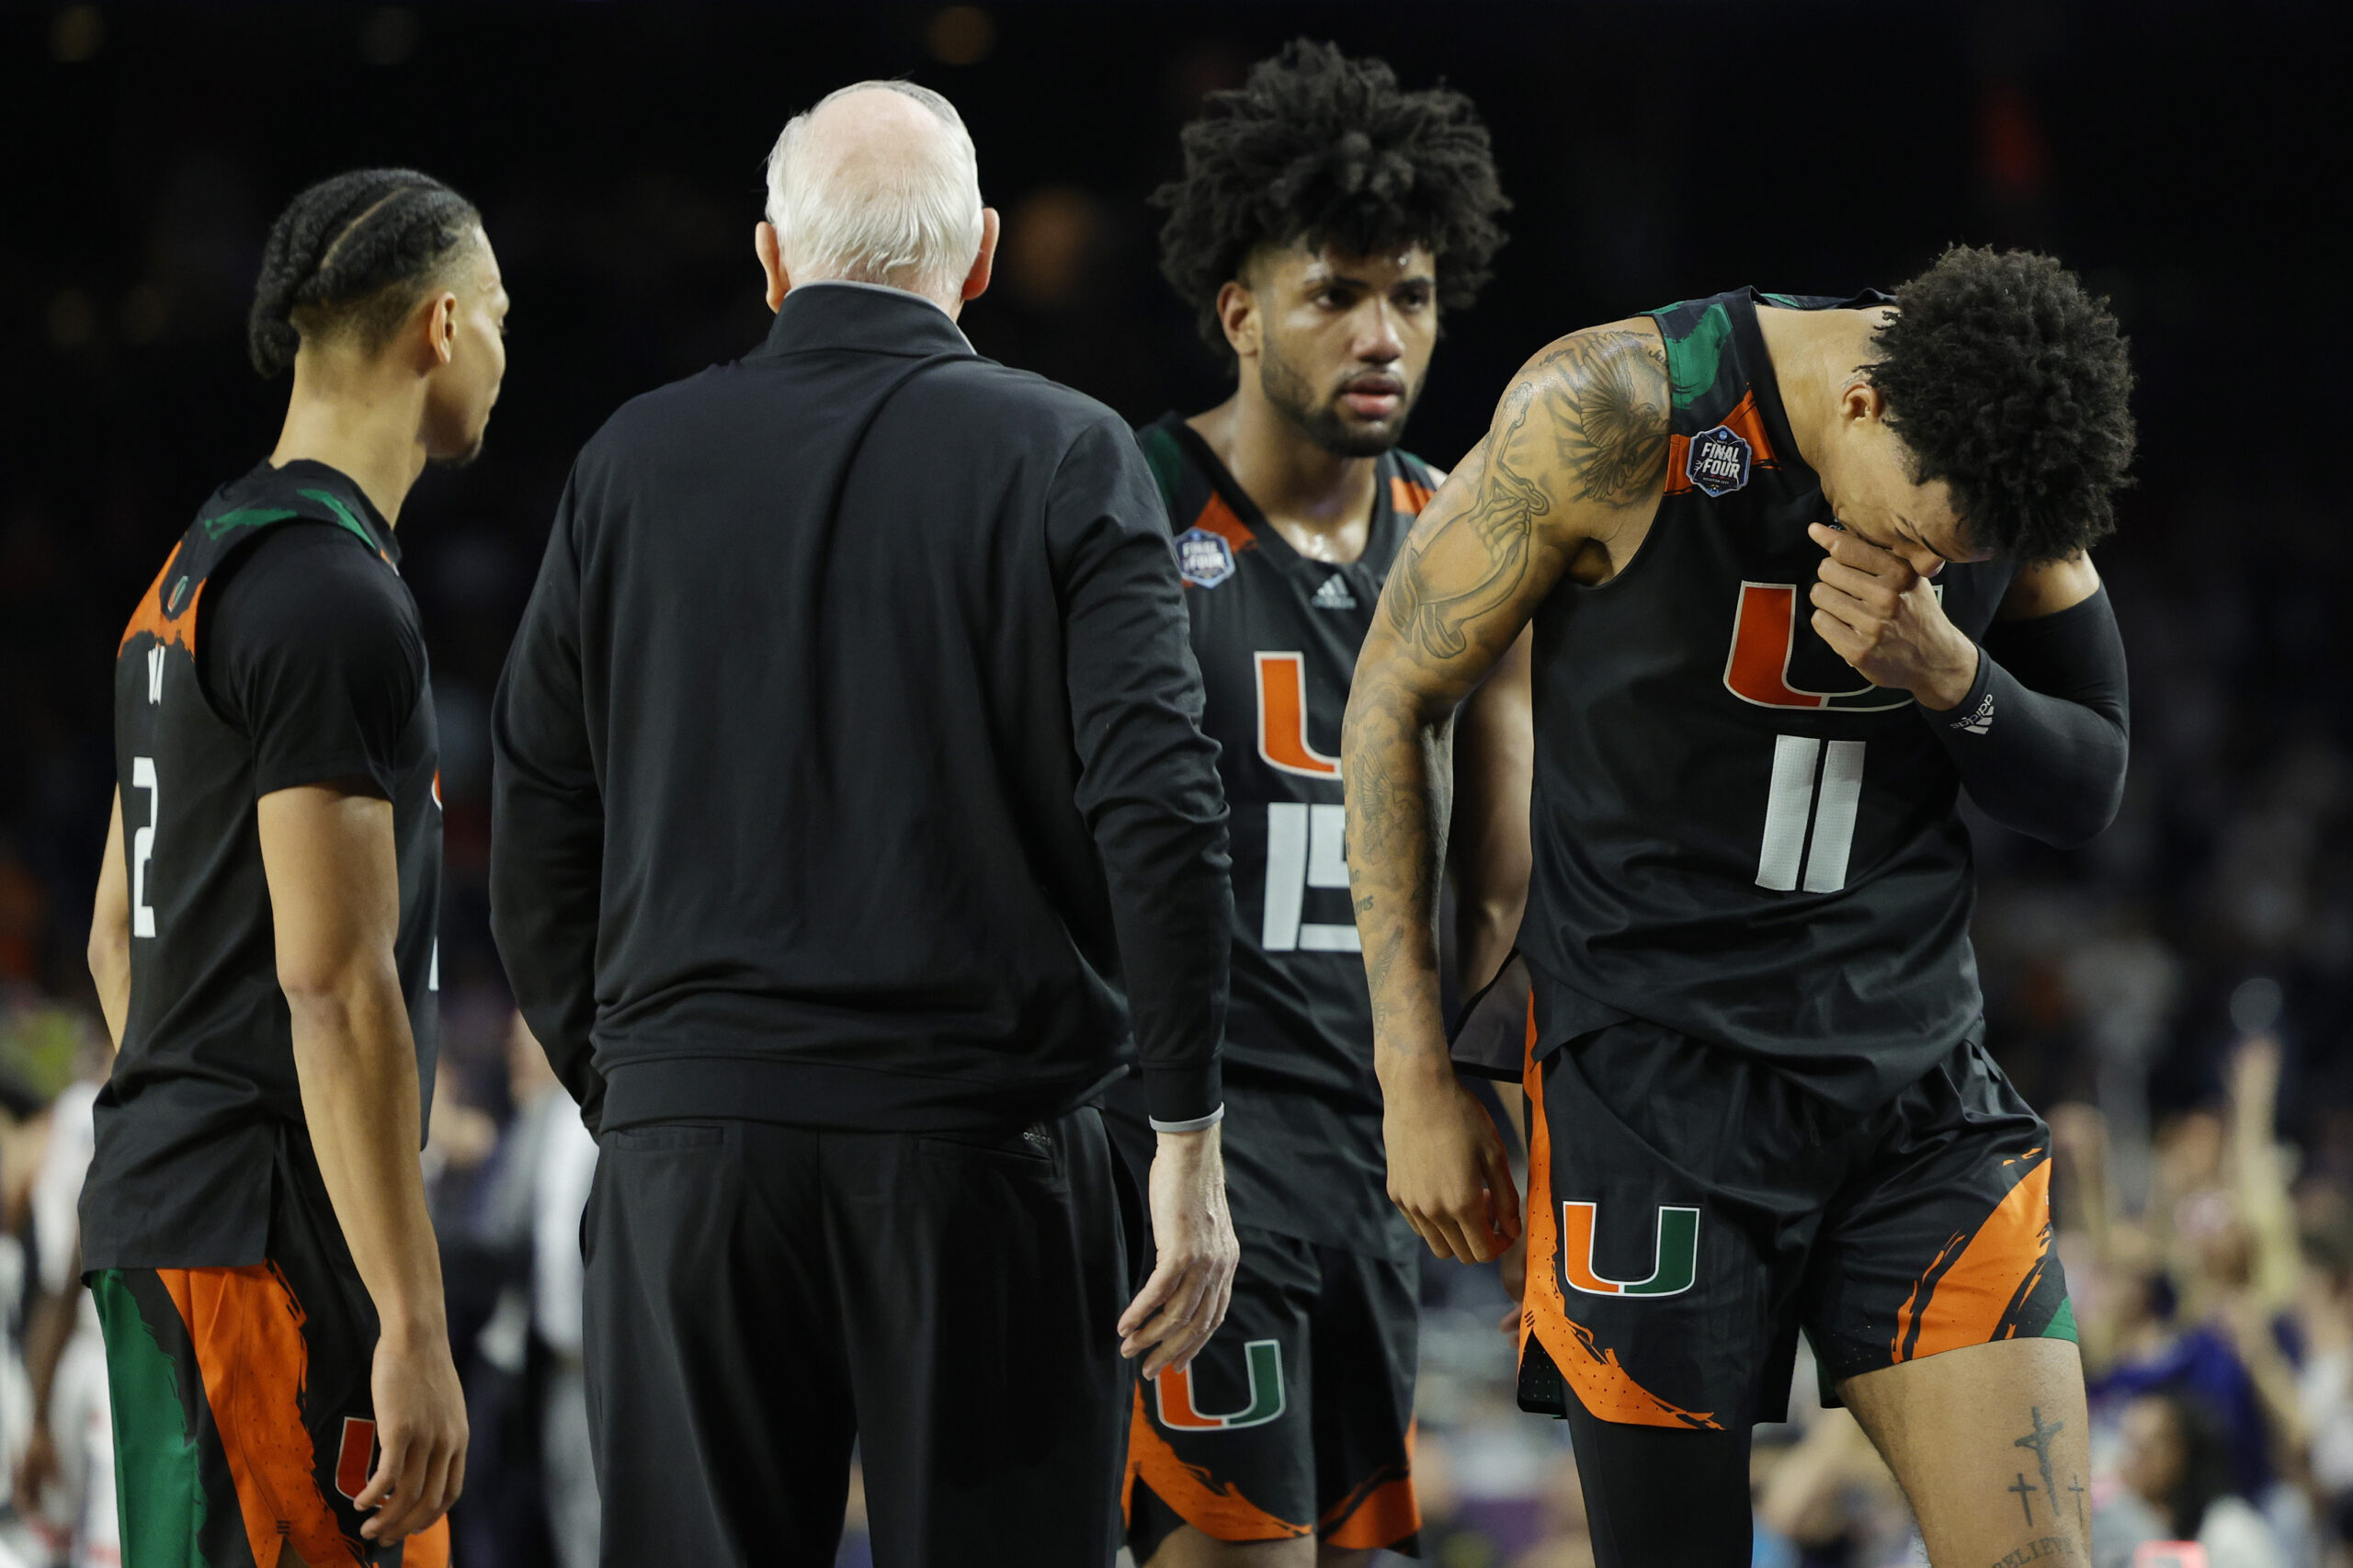 HOUSTON, TEXAS - APRIL 01: Jordan Miller #11 of the Miami Hurricanes and teammates react after losing to the Connecticut Huskies 72-59 during the NCAA Men's Basketball Tournament Final Four semifinal game at NRG Stadium on April 01, 2023 in Houston, Texas. (Photo by Carmen Mandato/Getty Images)